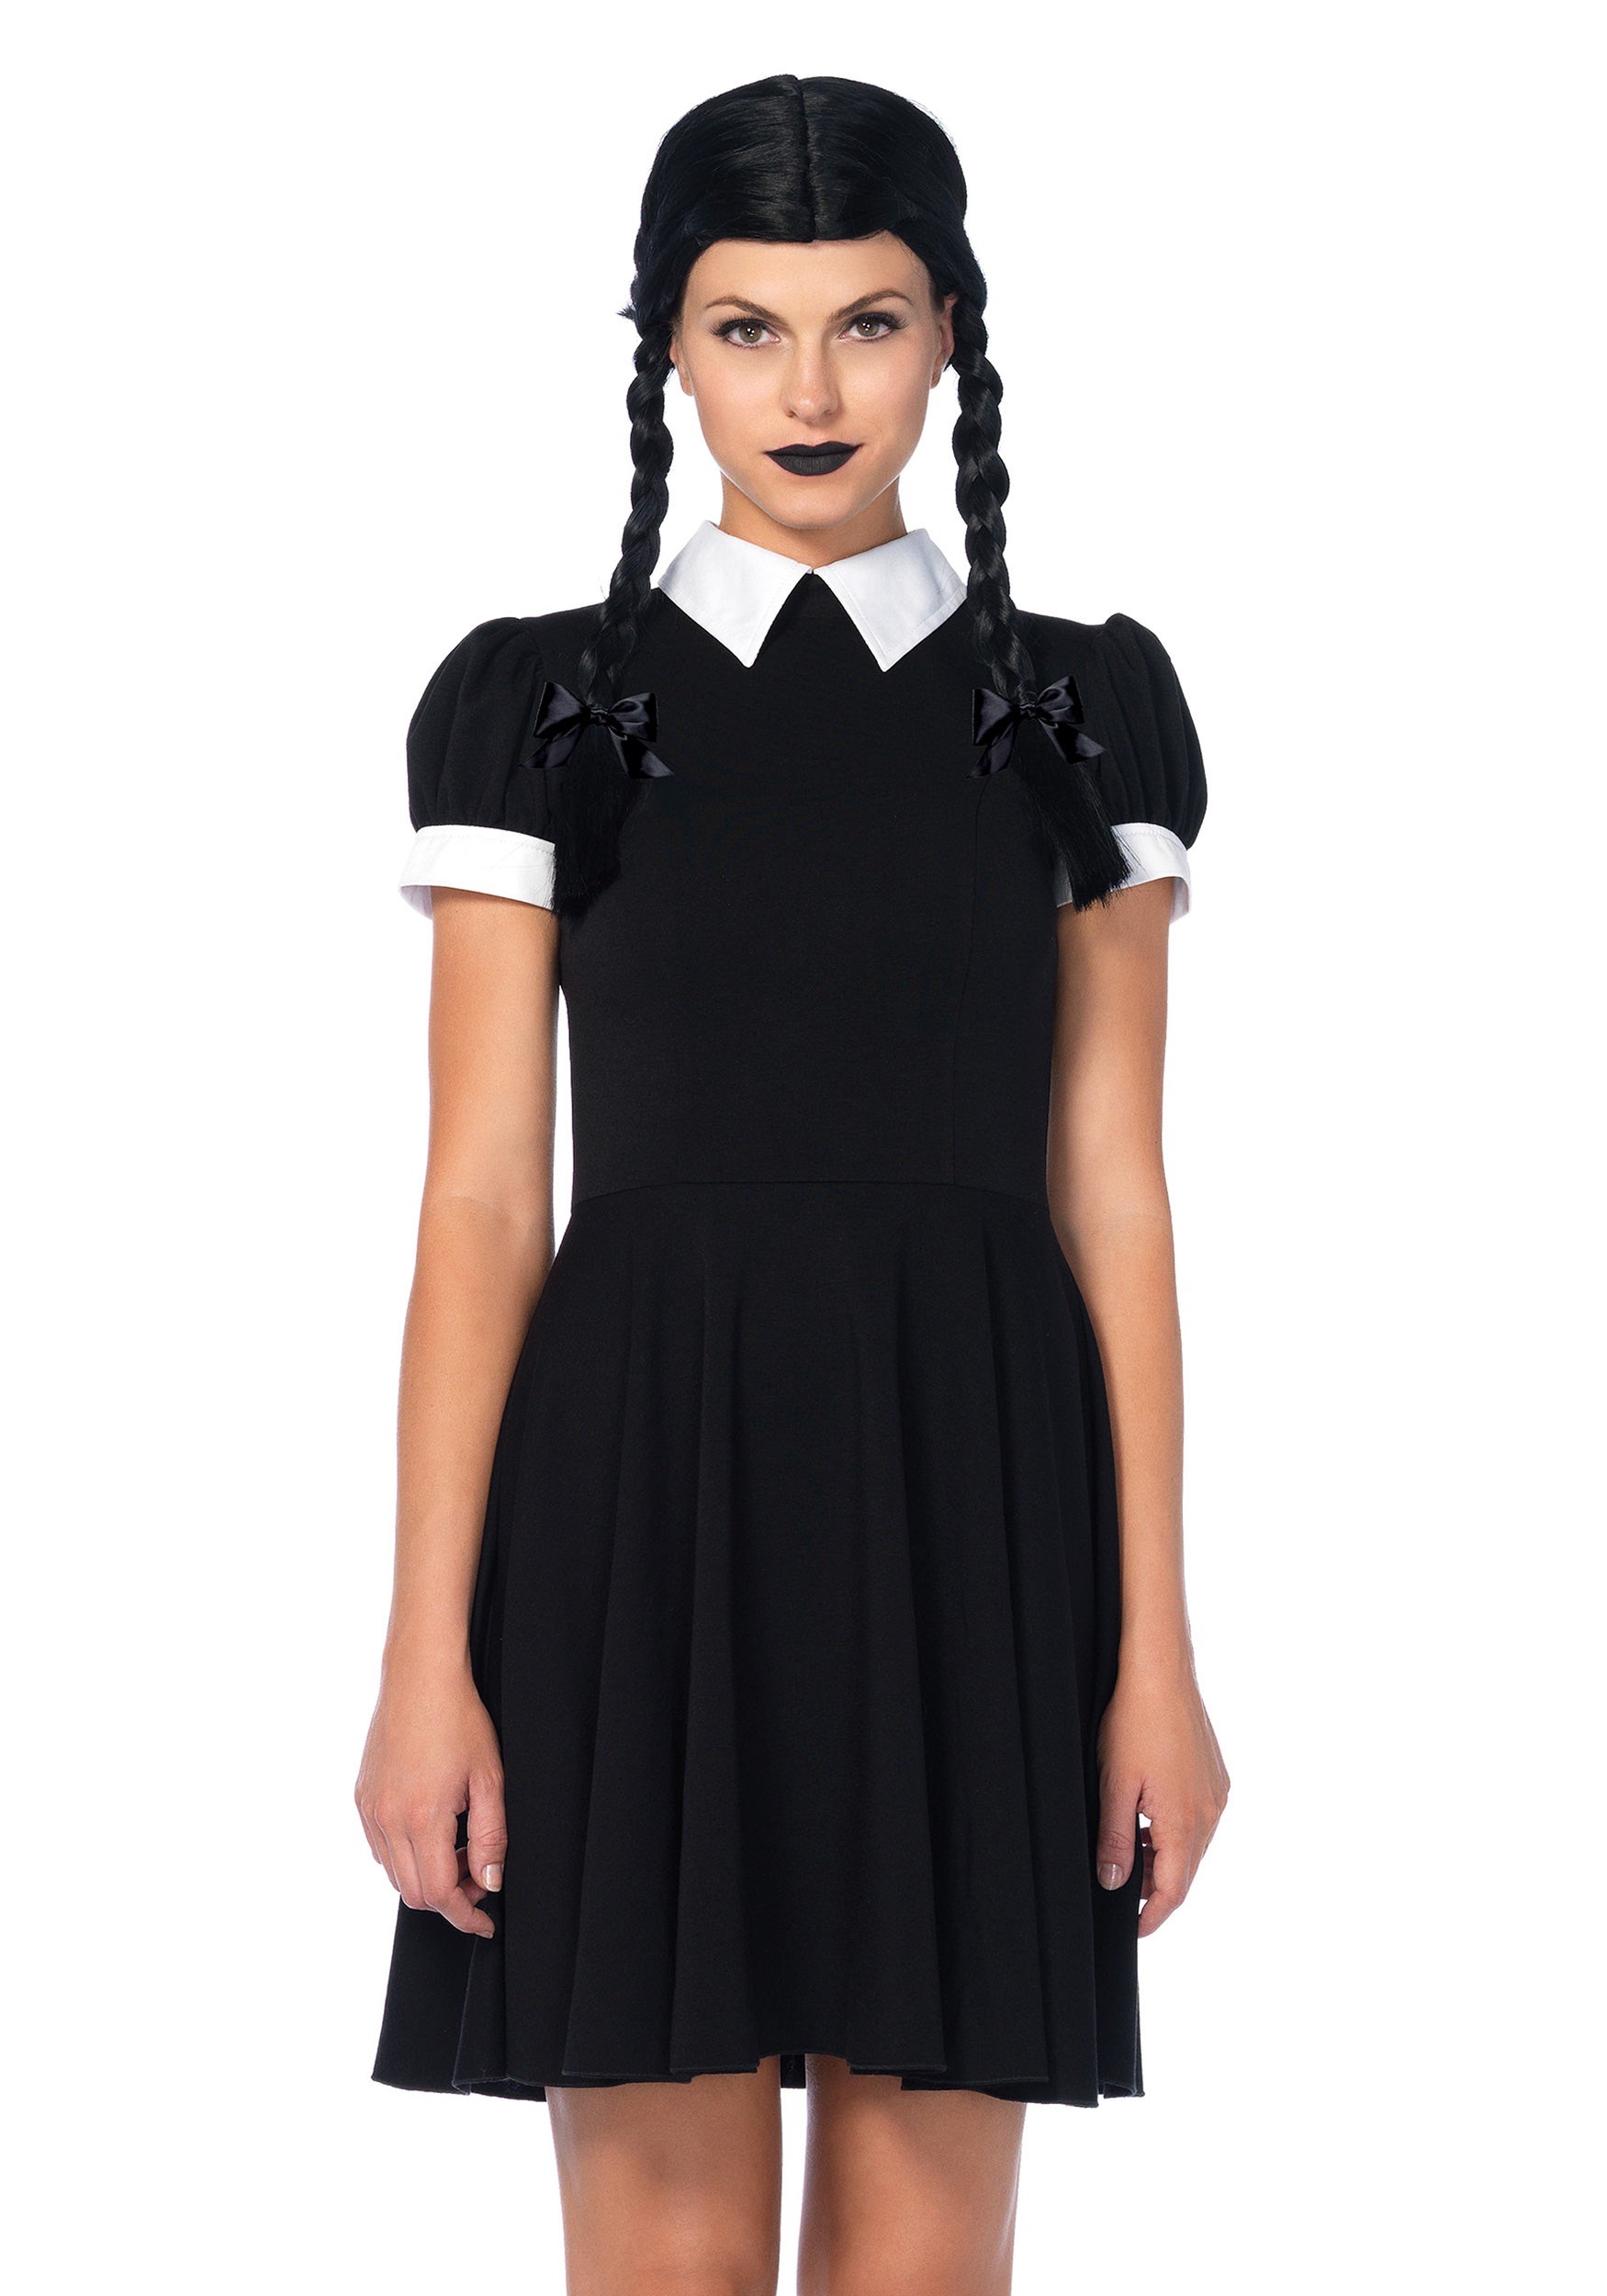 Image of Womens Gothic Darling Costume ID LE85562-S/M